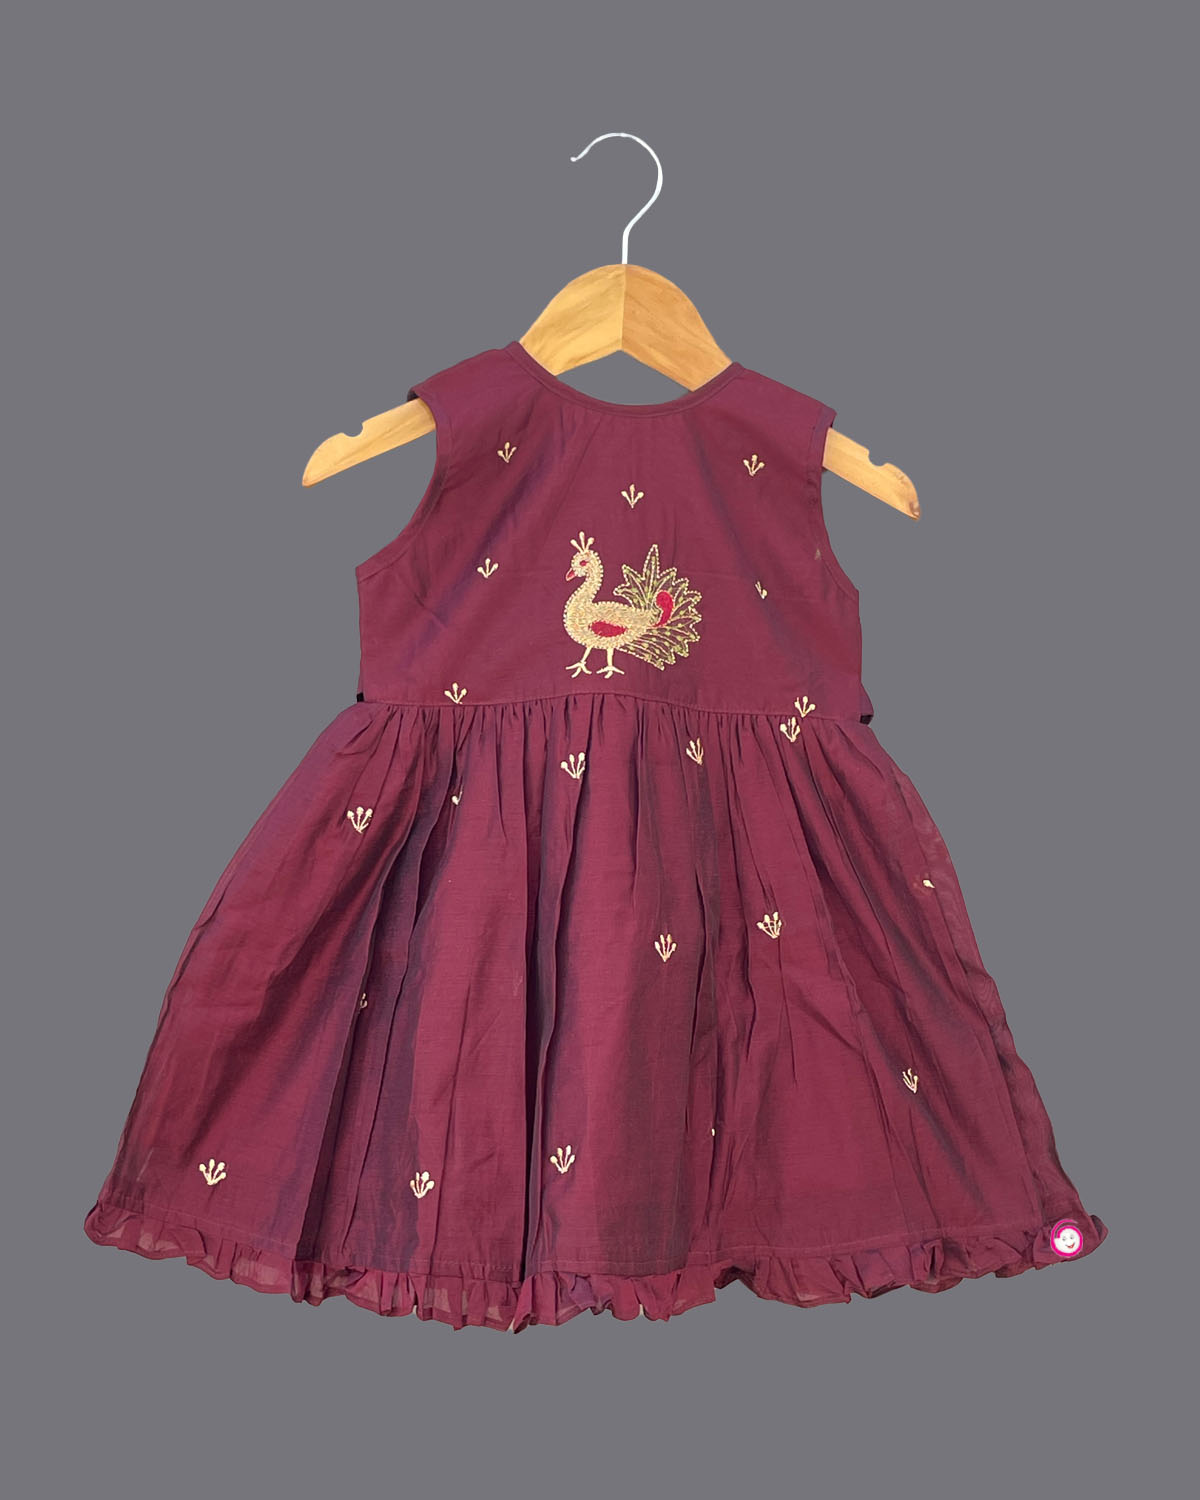 Girls Beautiful One Peacock Embroidery Frock